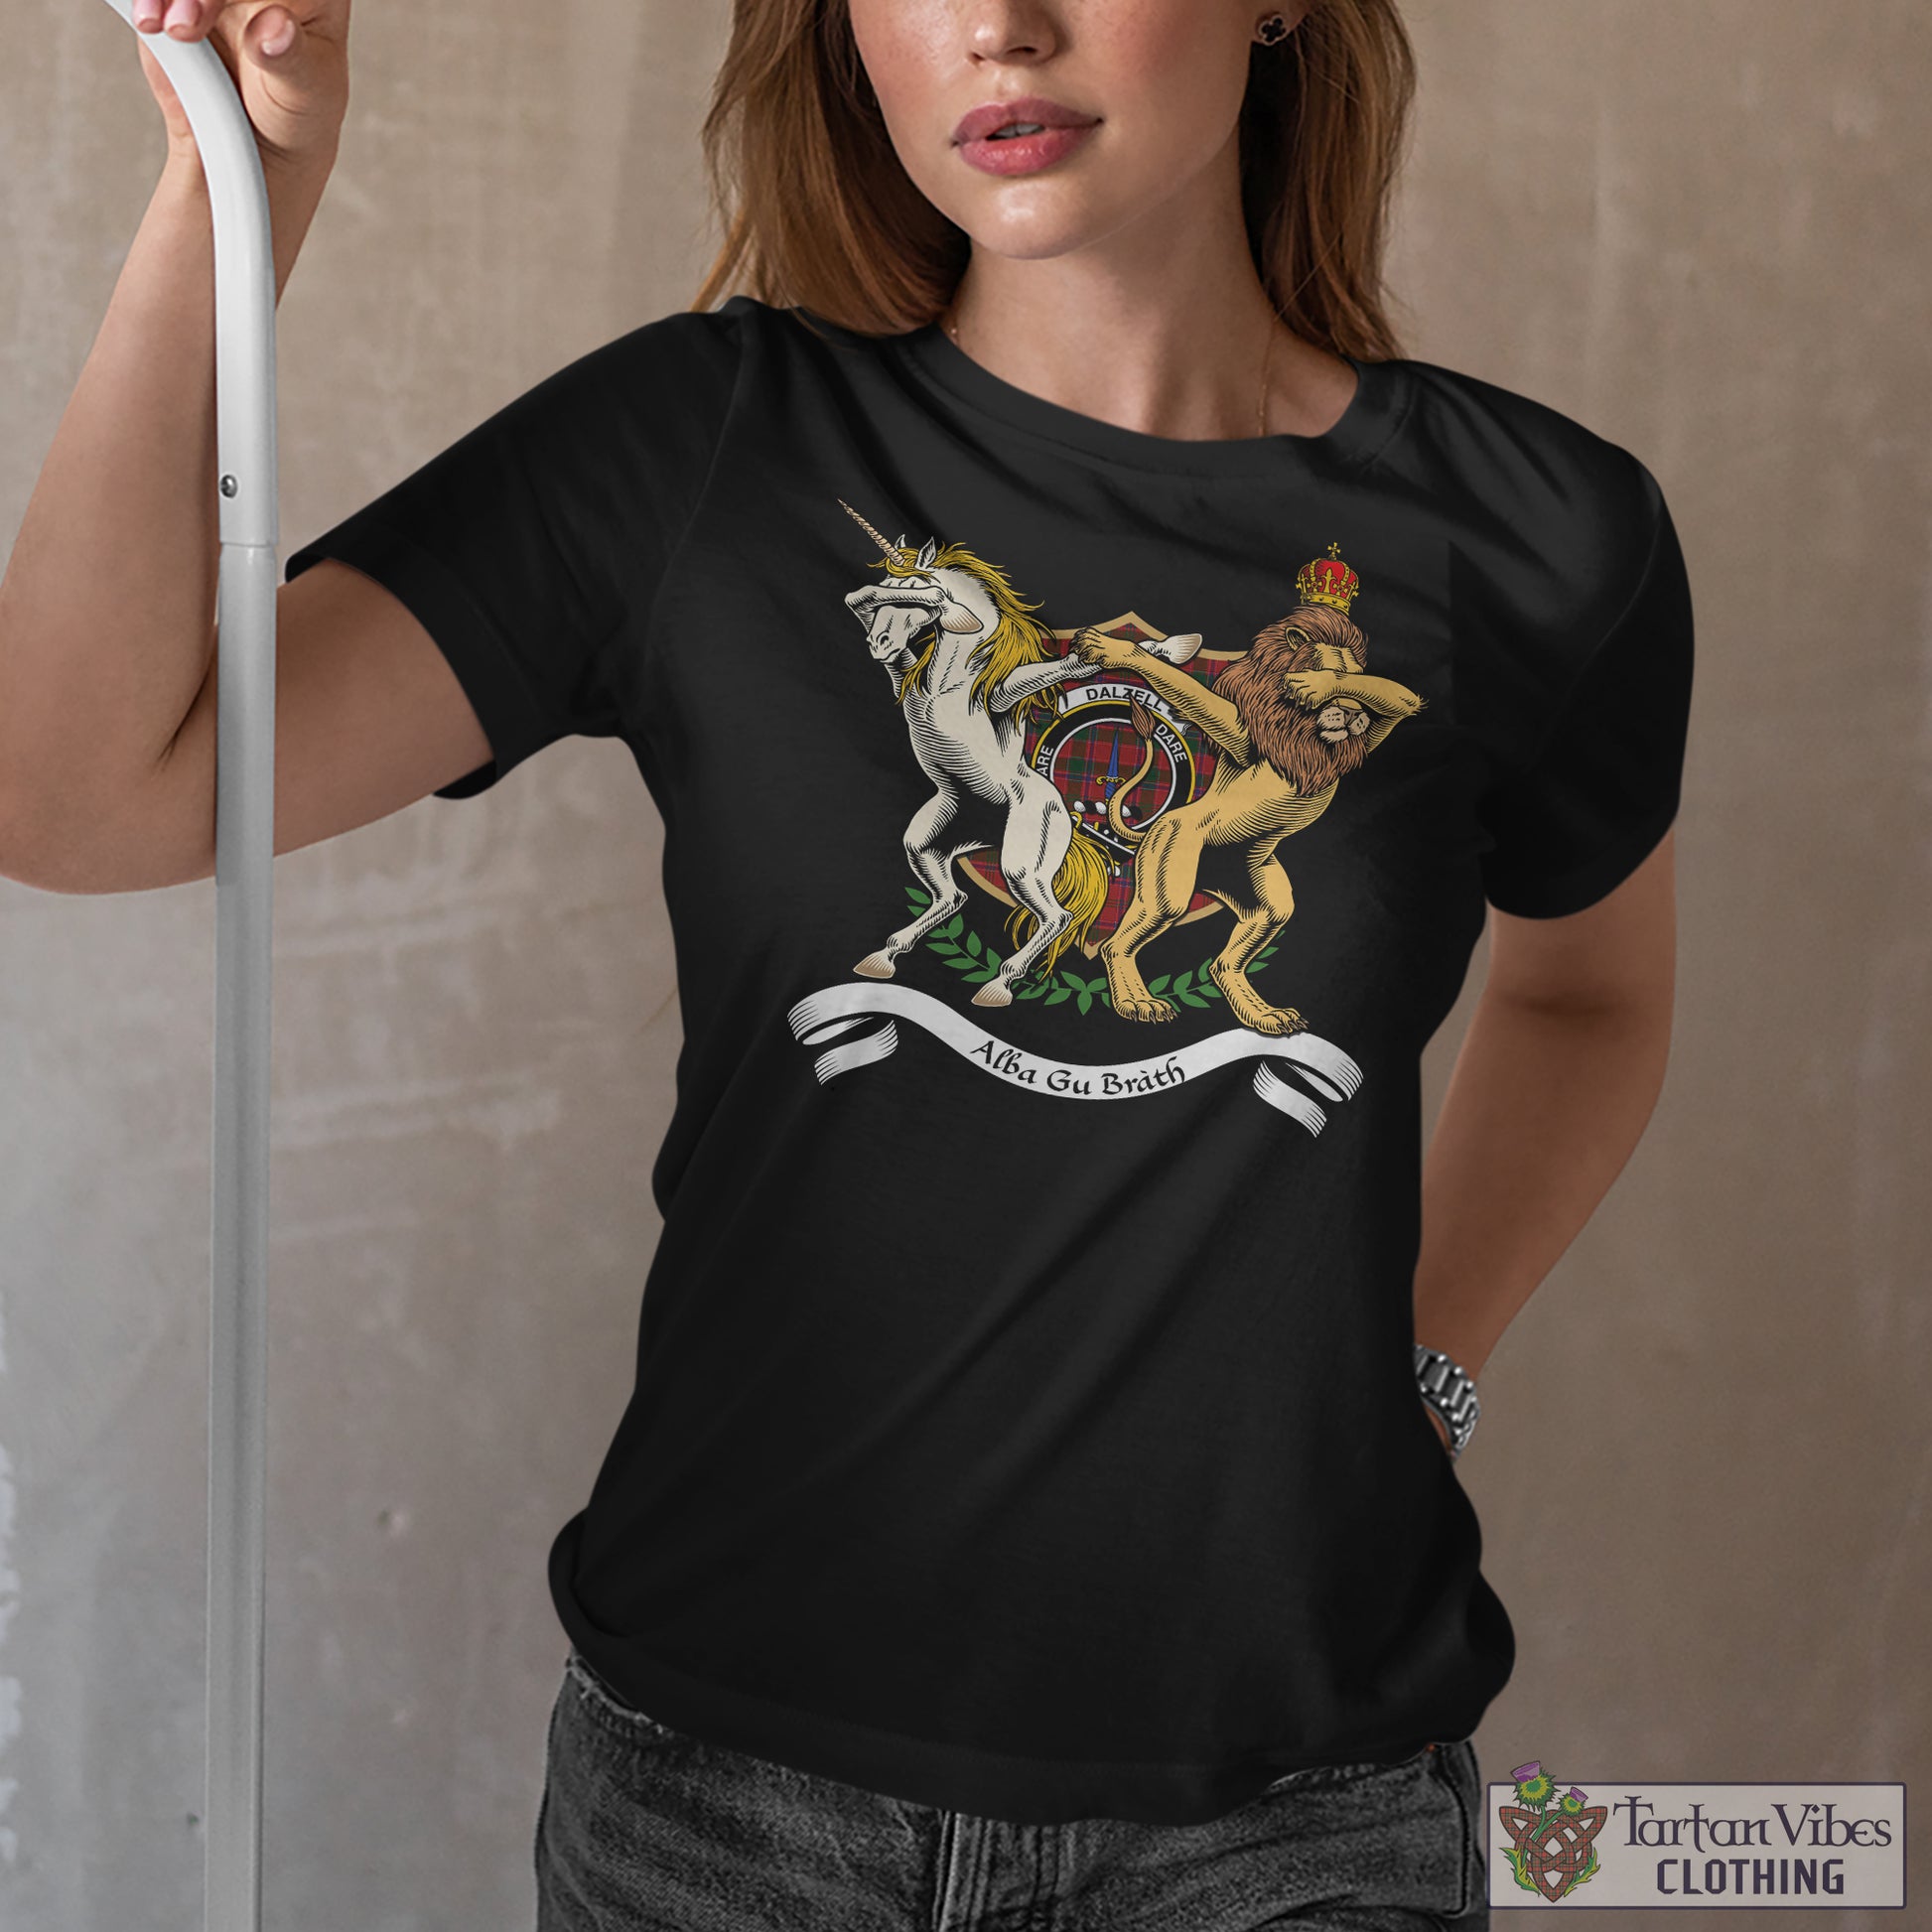 Tartan Vibes Clothing Dalzell (Dalziel) Family Crest Cotton Women's T-Shirt with Scotland Royal Coat Of Arm Funny Style